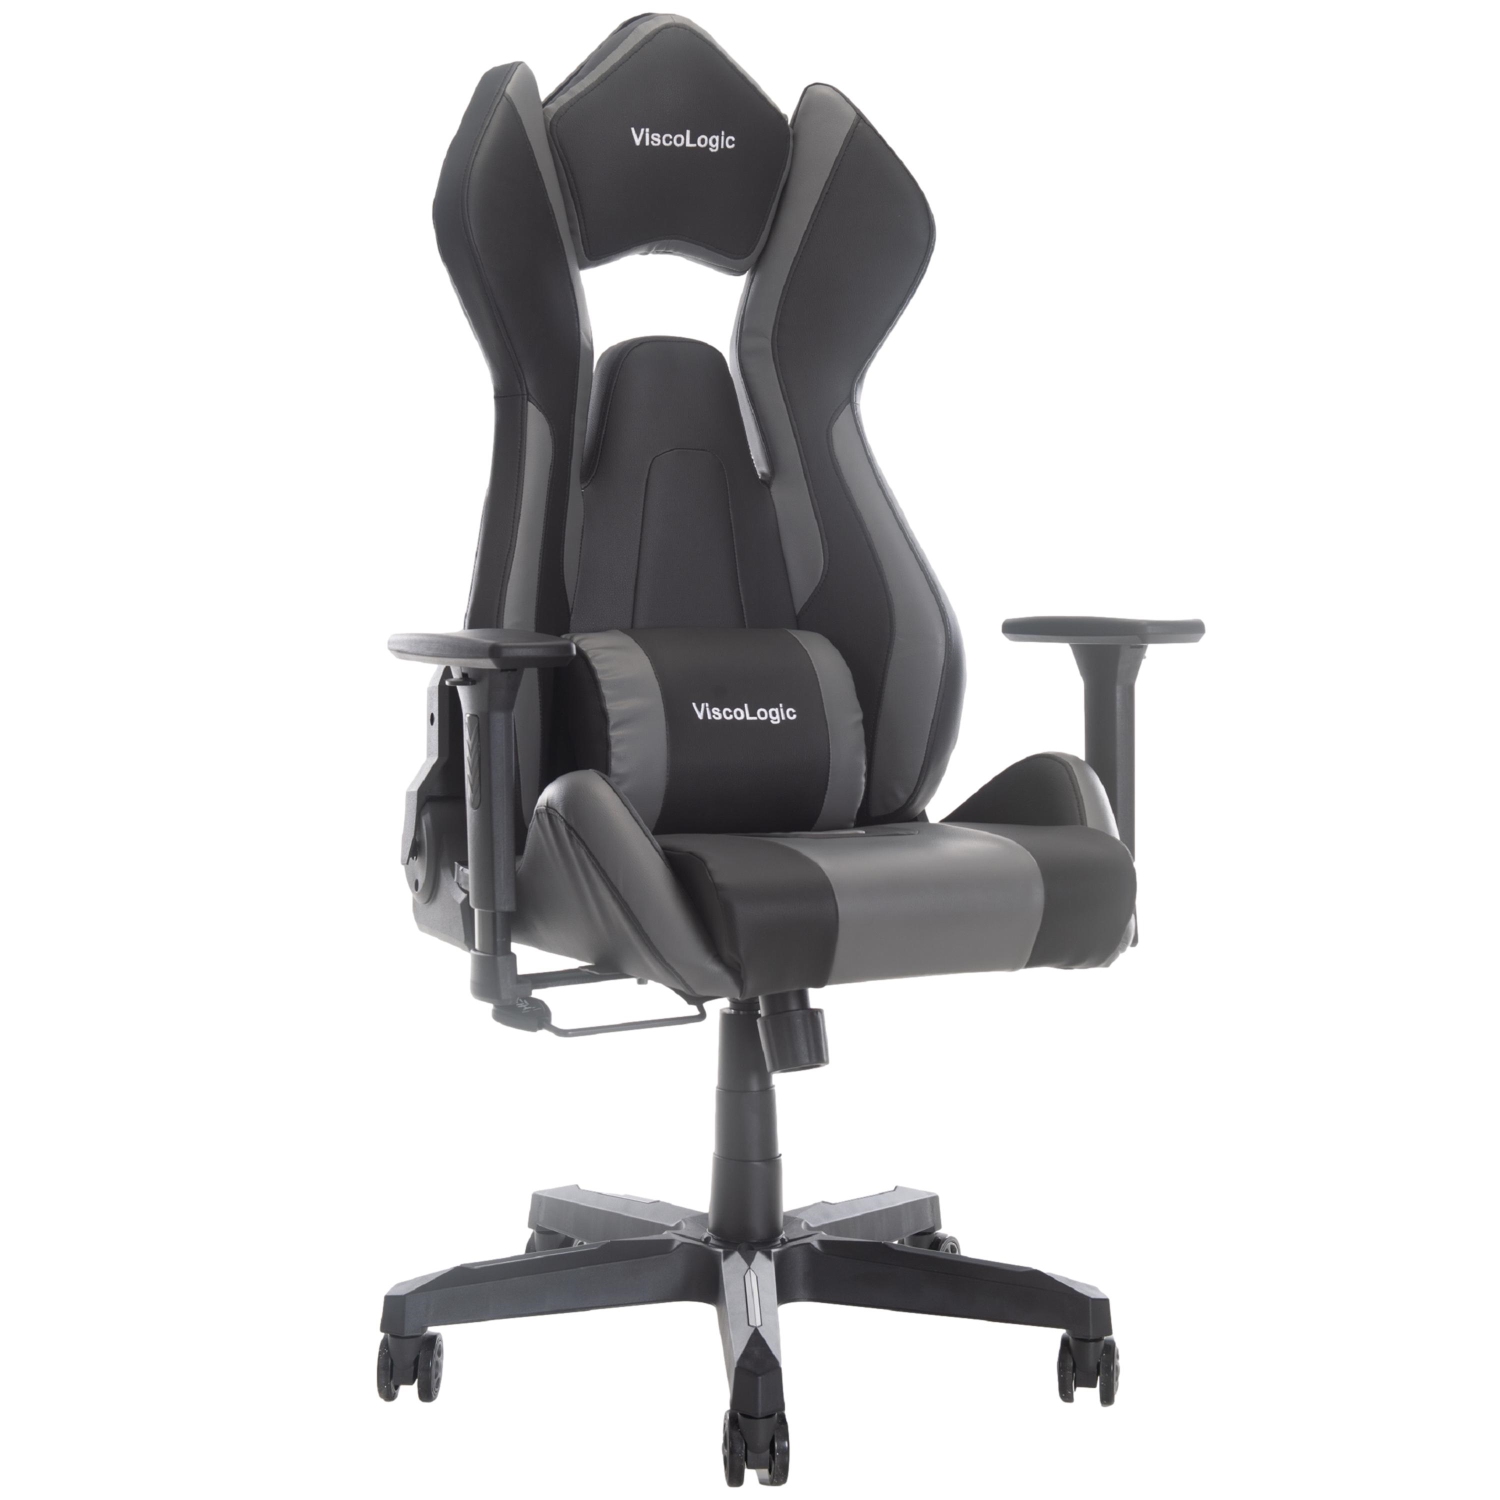 Cayenne M3 ViscoLogic® Ergonomic Racing Chair for PC Video Games and Computers